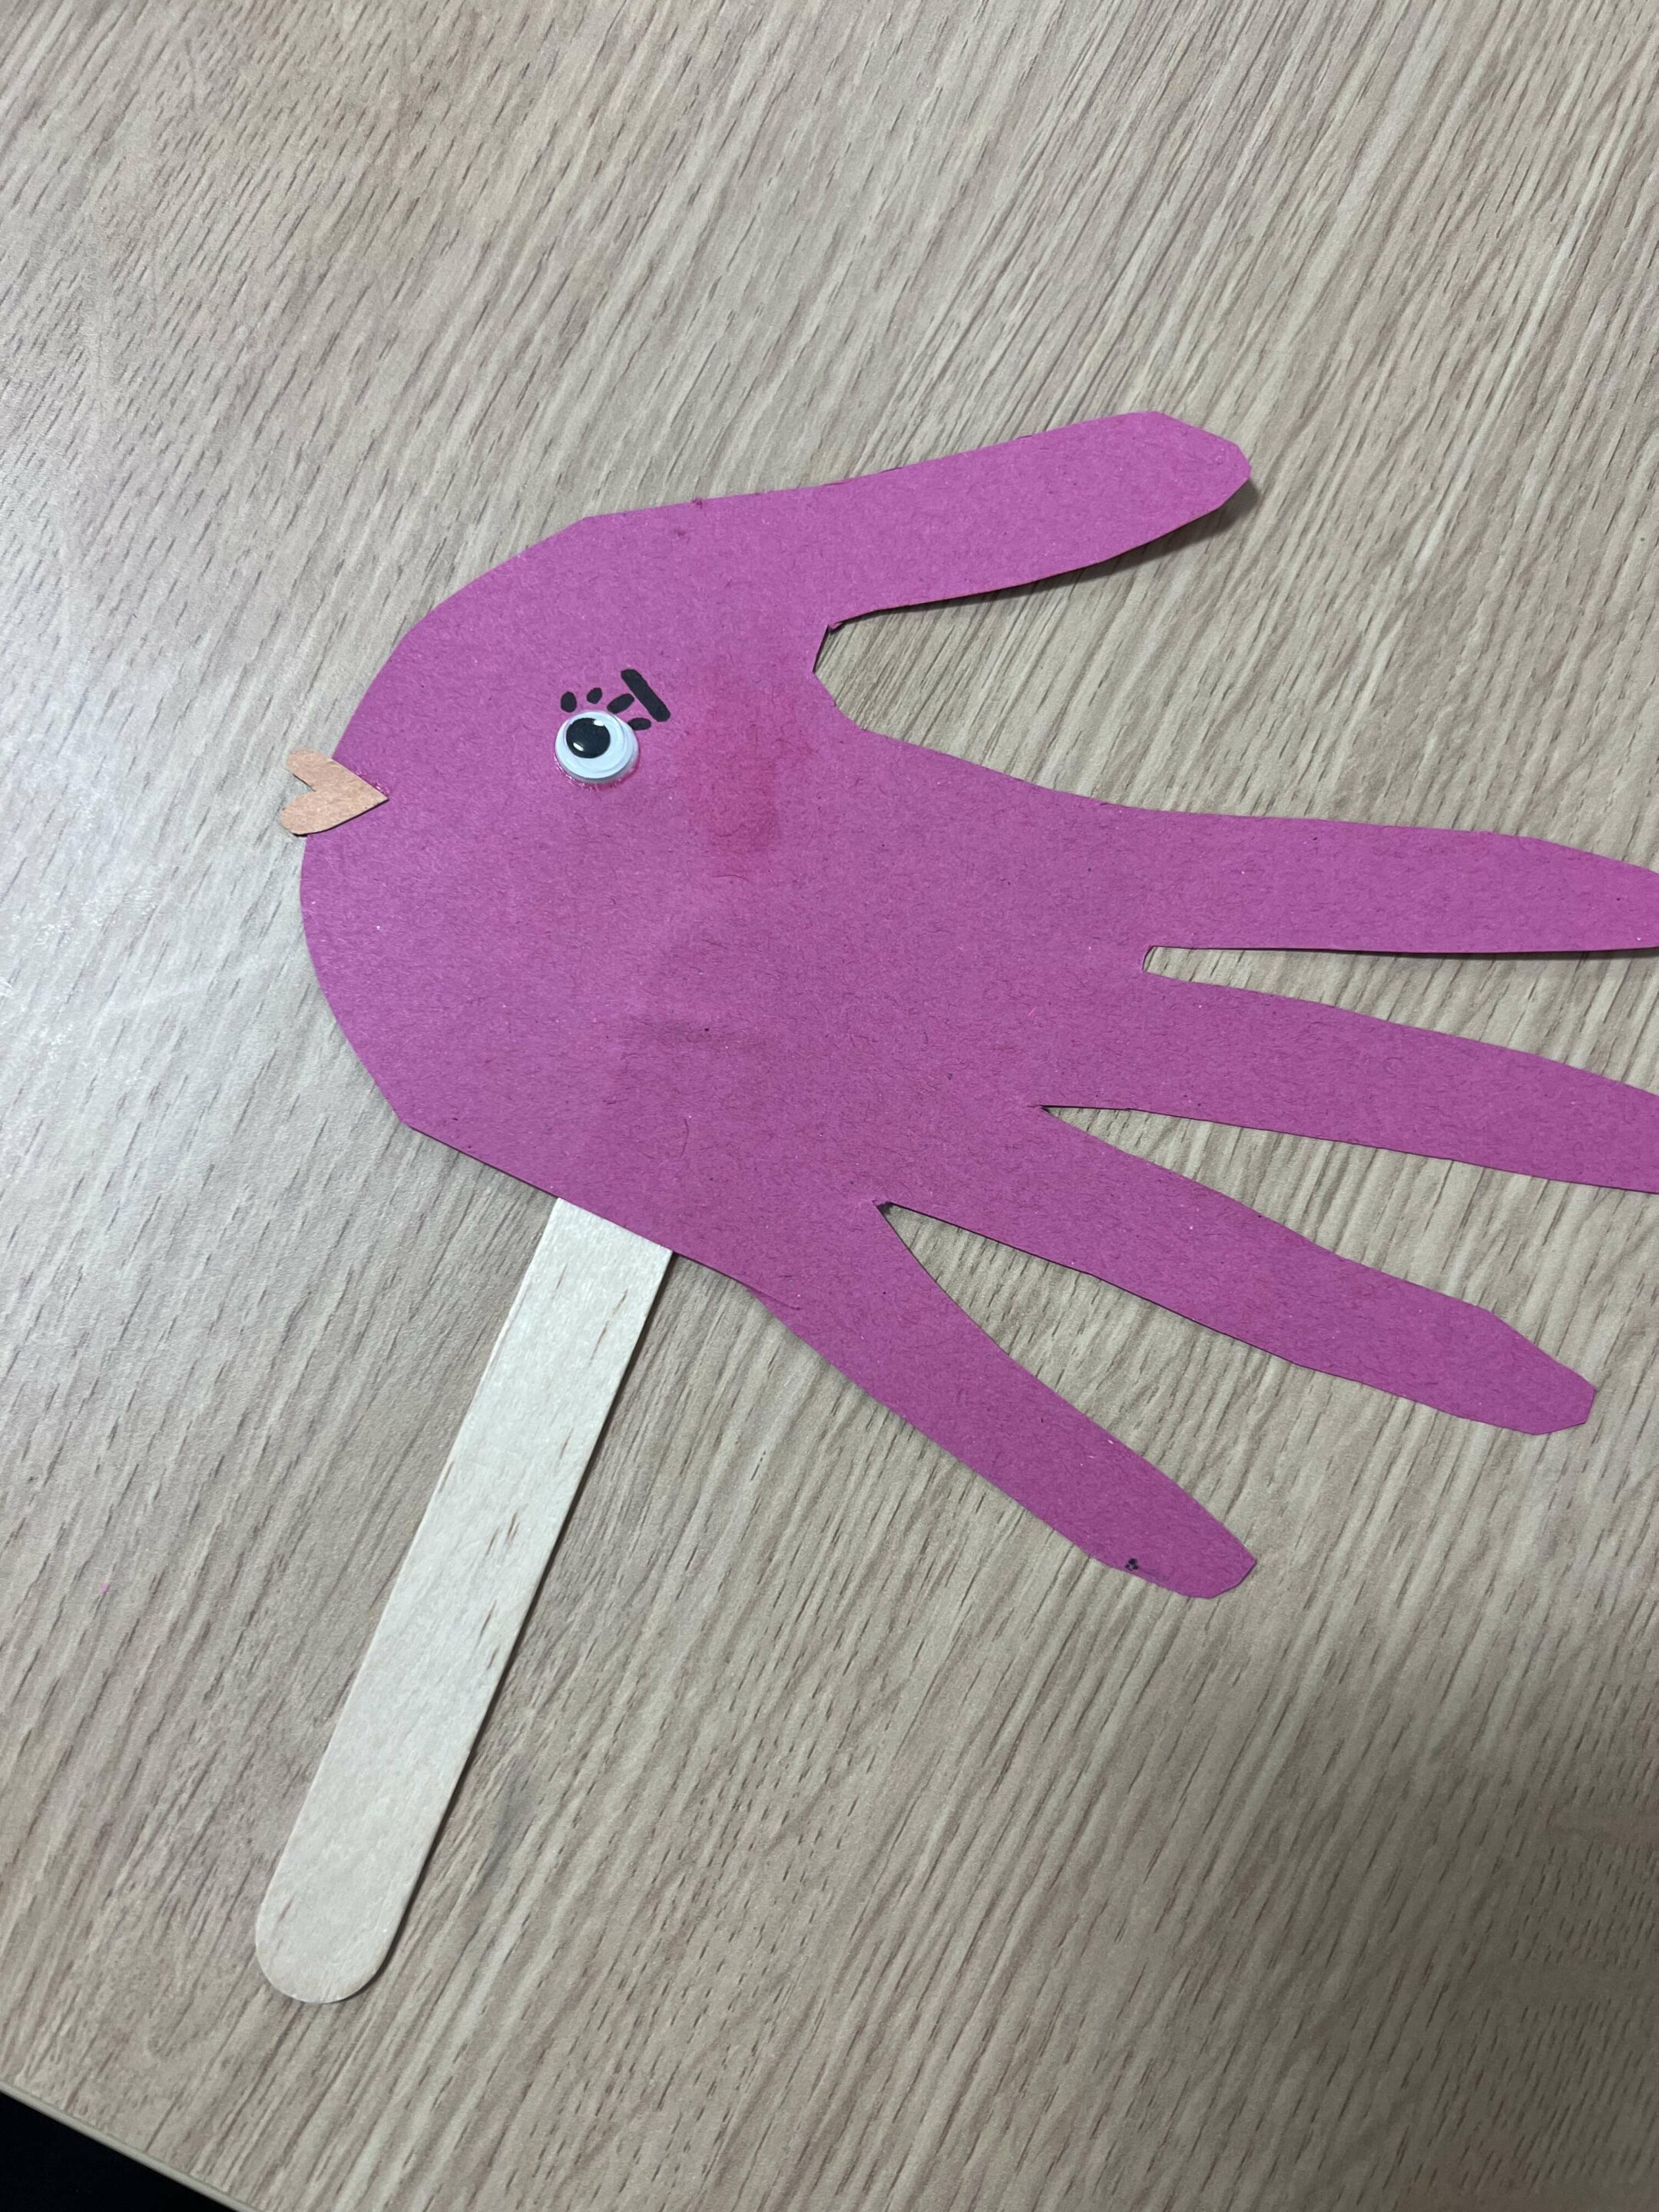 The finished fish puppet craft